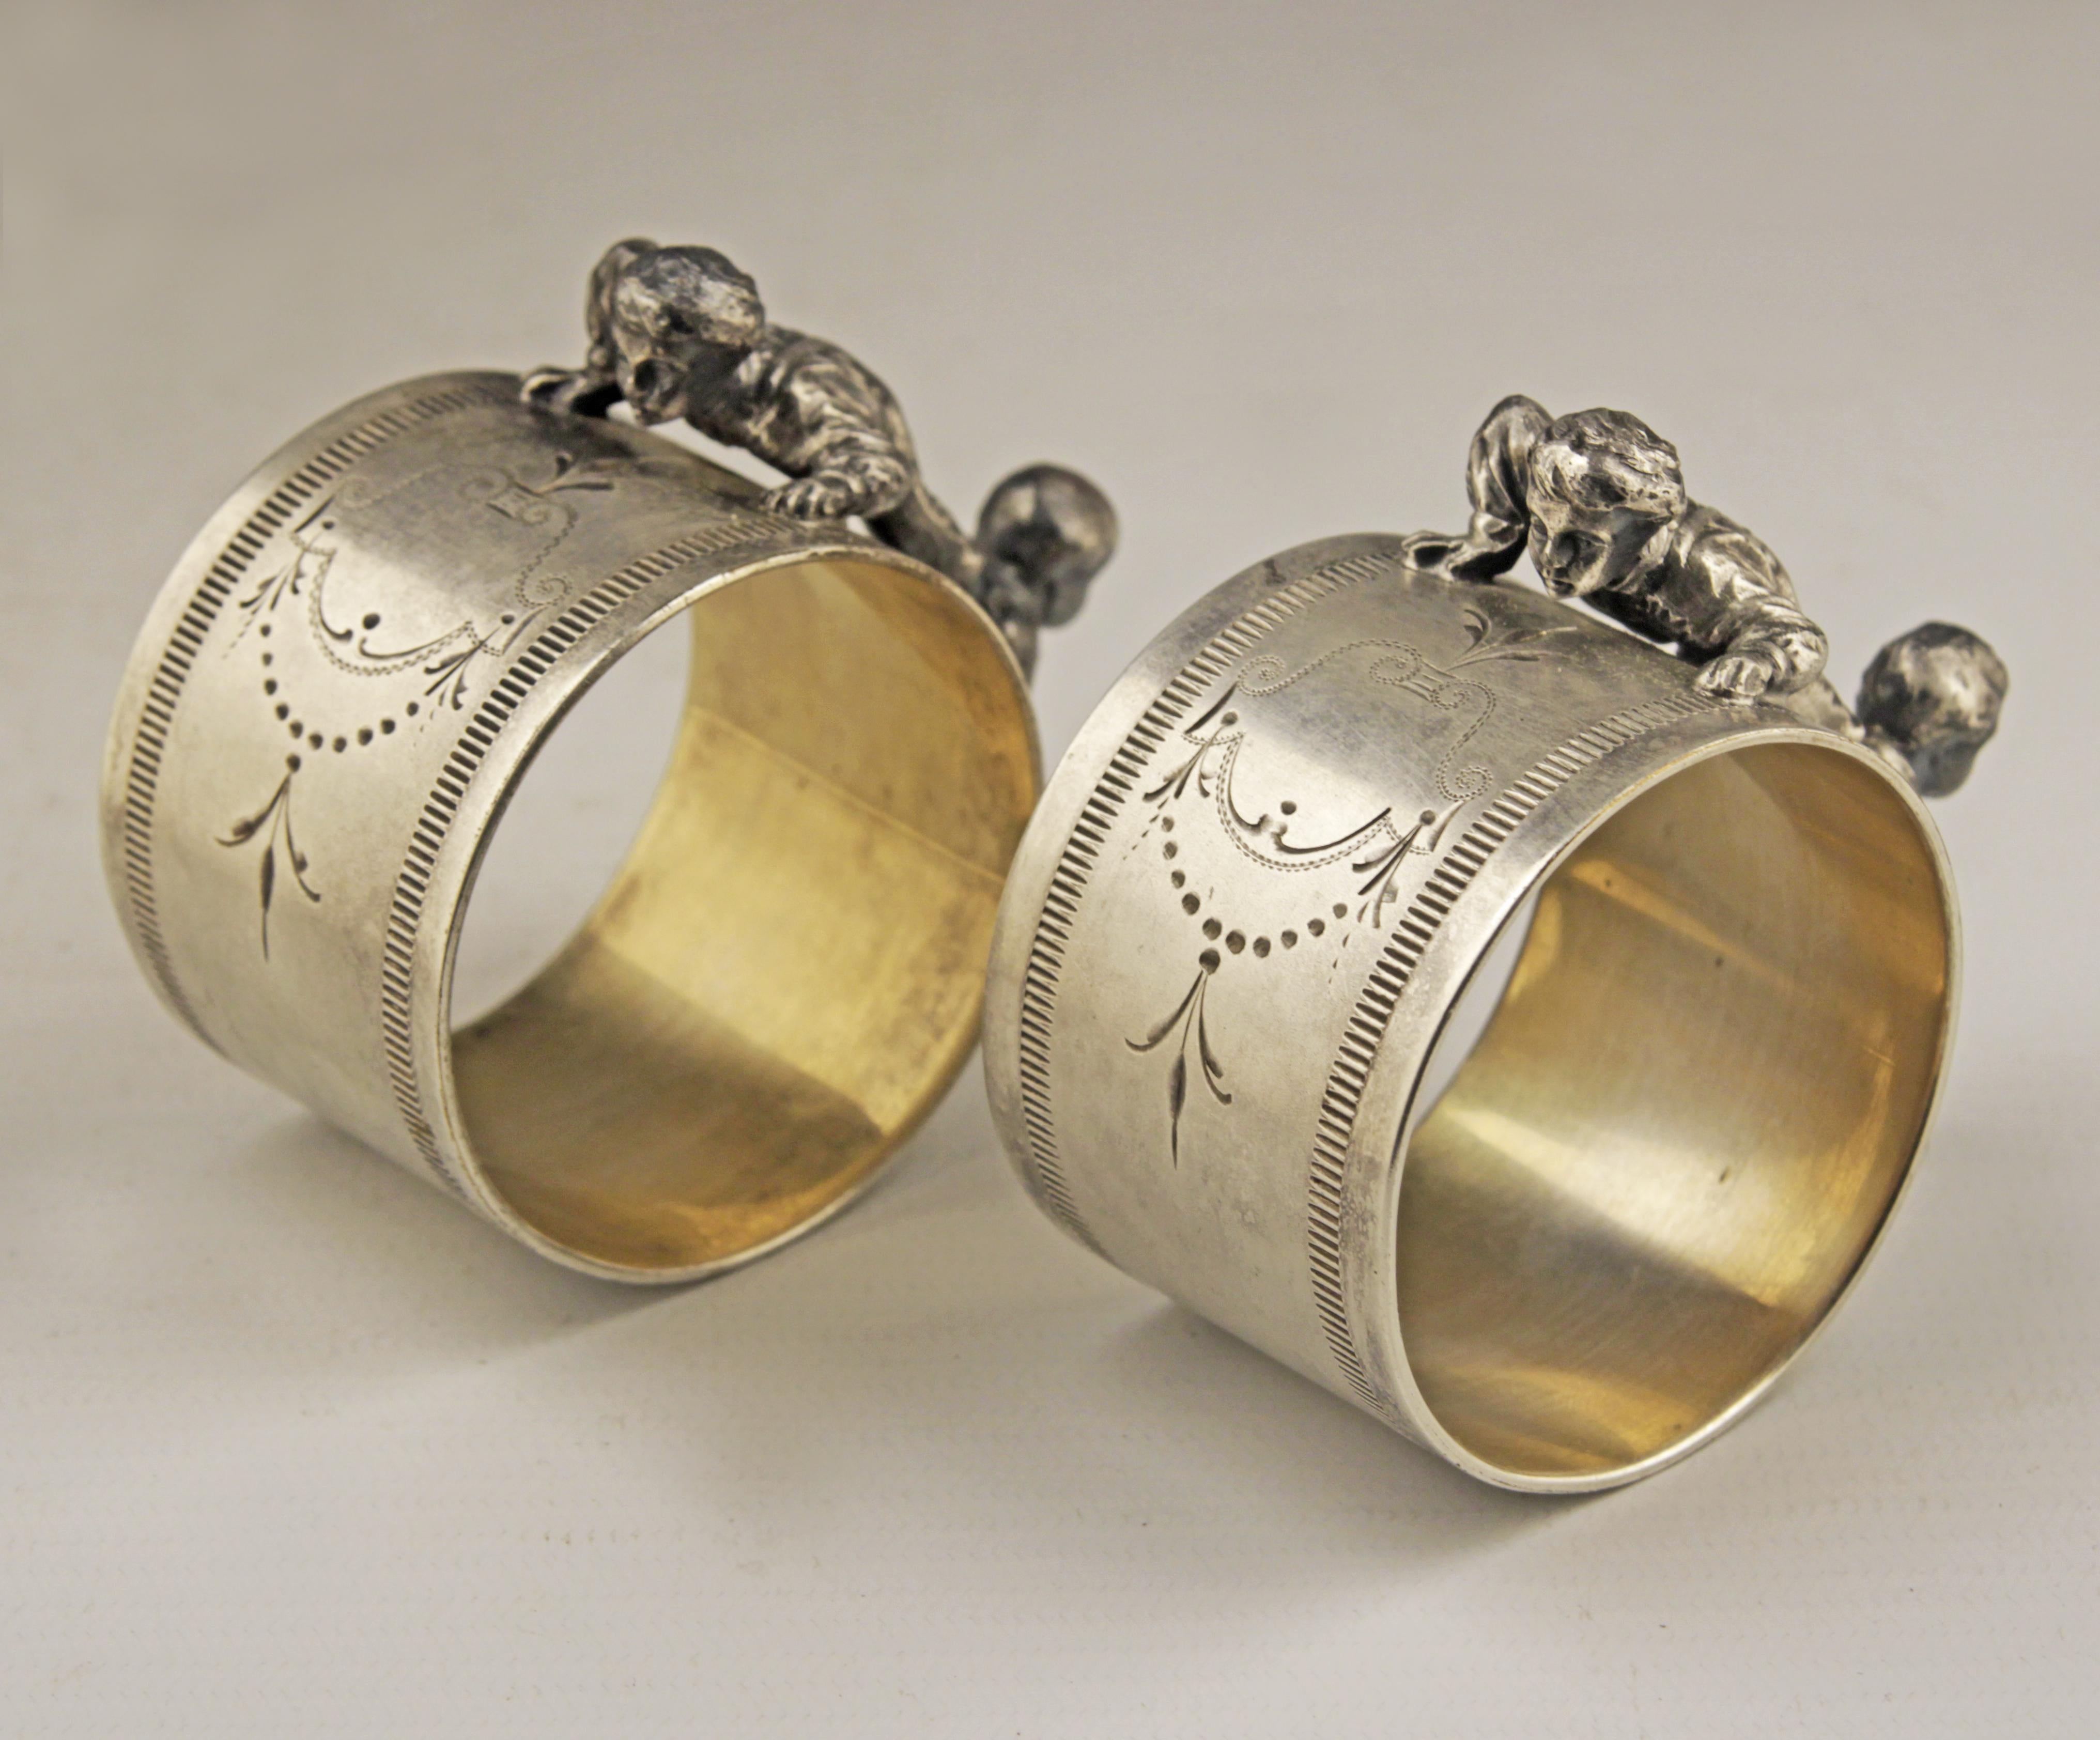 Pair of Jugendstil Silver Napkin Rings and Decorative Box by German Makers WMF In Fair Condition For Sale In North Miami, FL